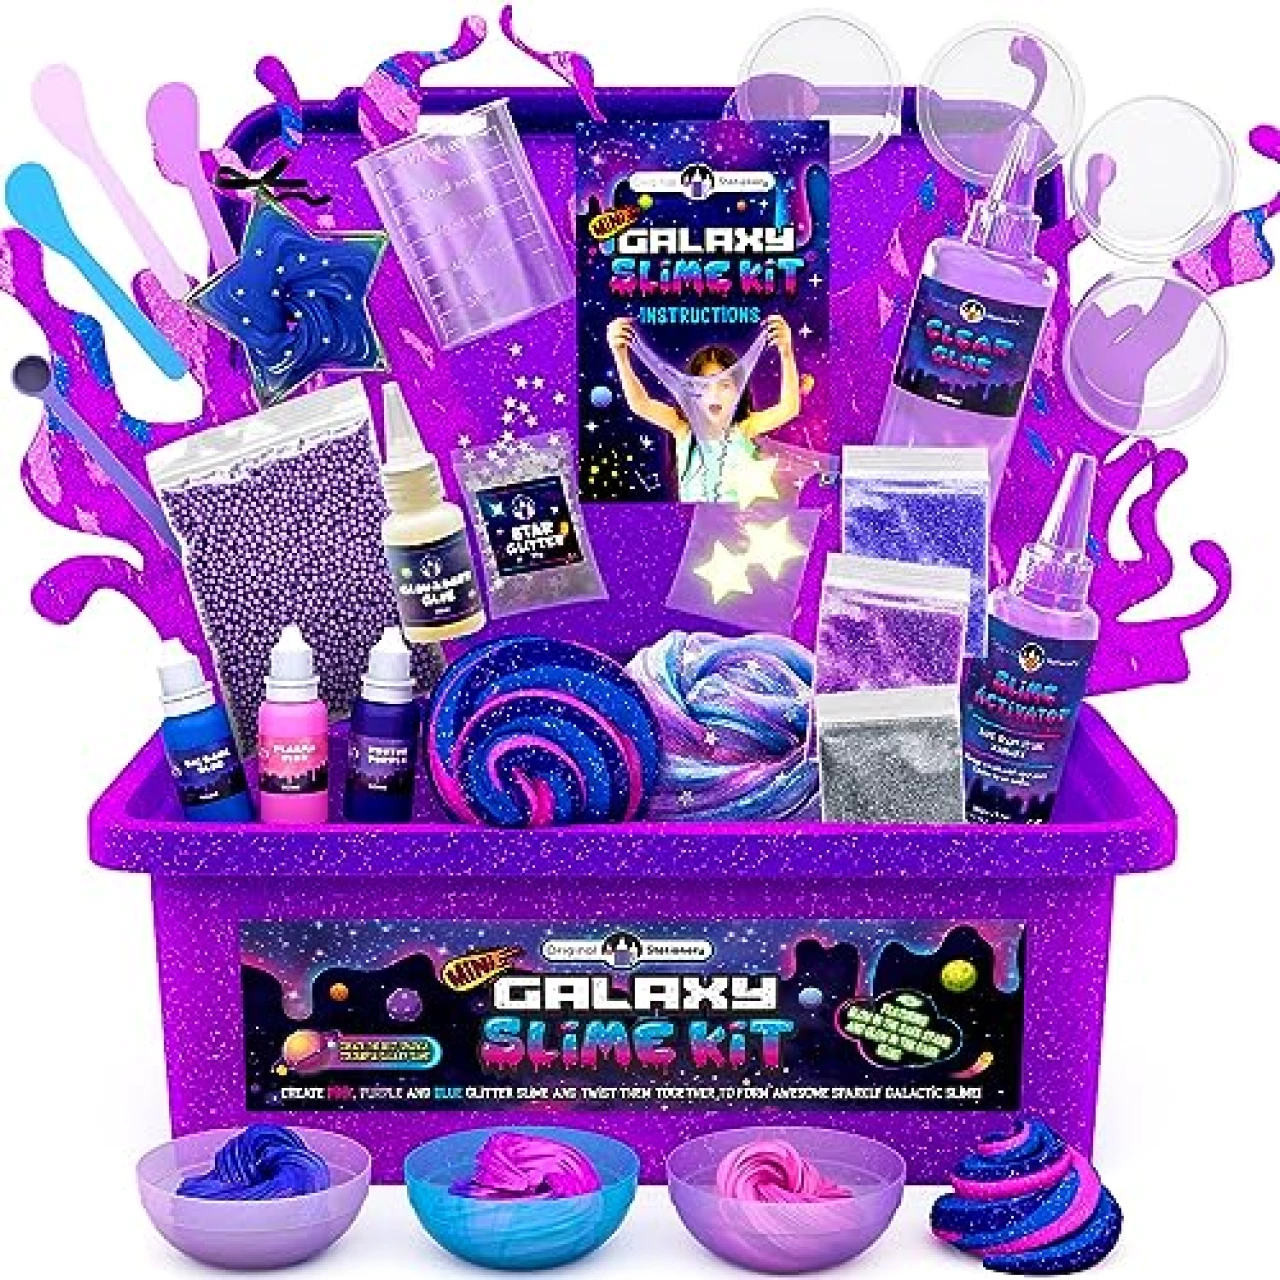 Original Stationery Mini Galaxy Slime Kit, Make Your Own Galactic Slime with Glitter, Glow in The Dark Powder &amp; Lots of Fun Add Ins, Awesome Gift Idea